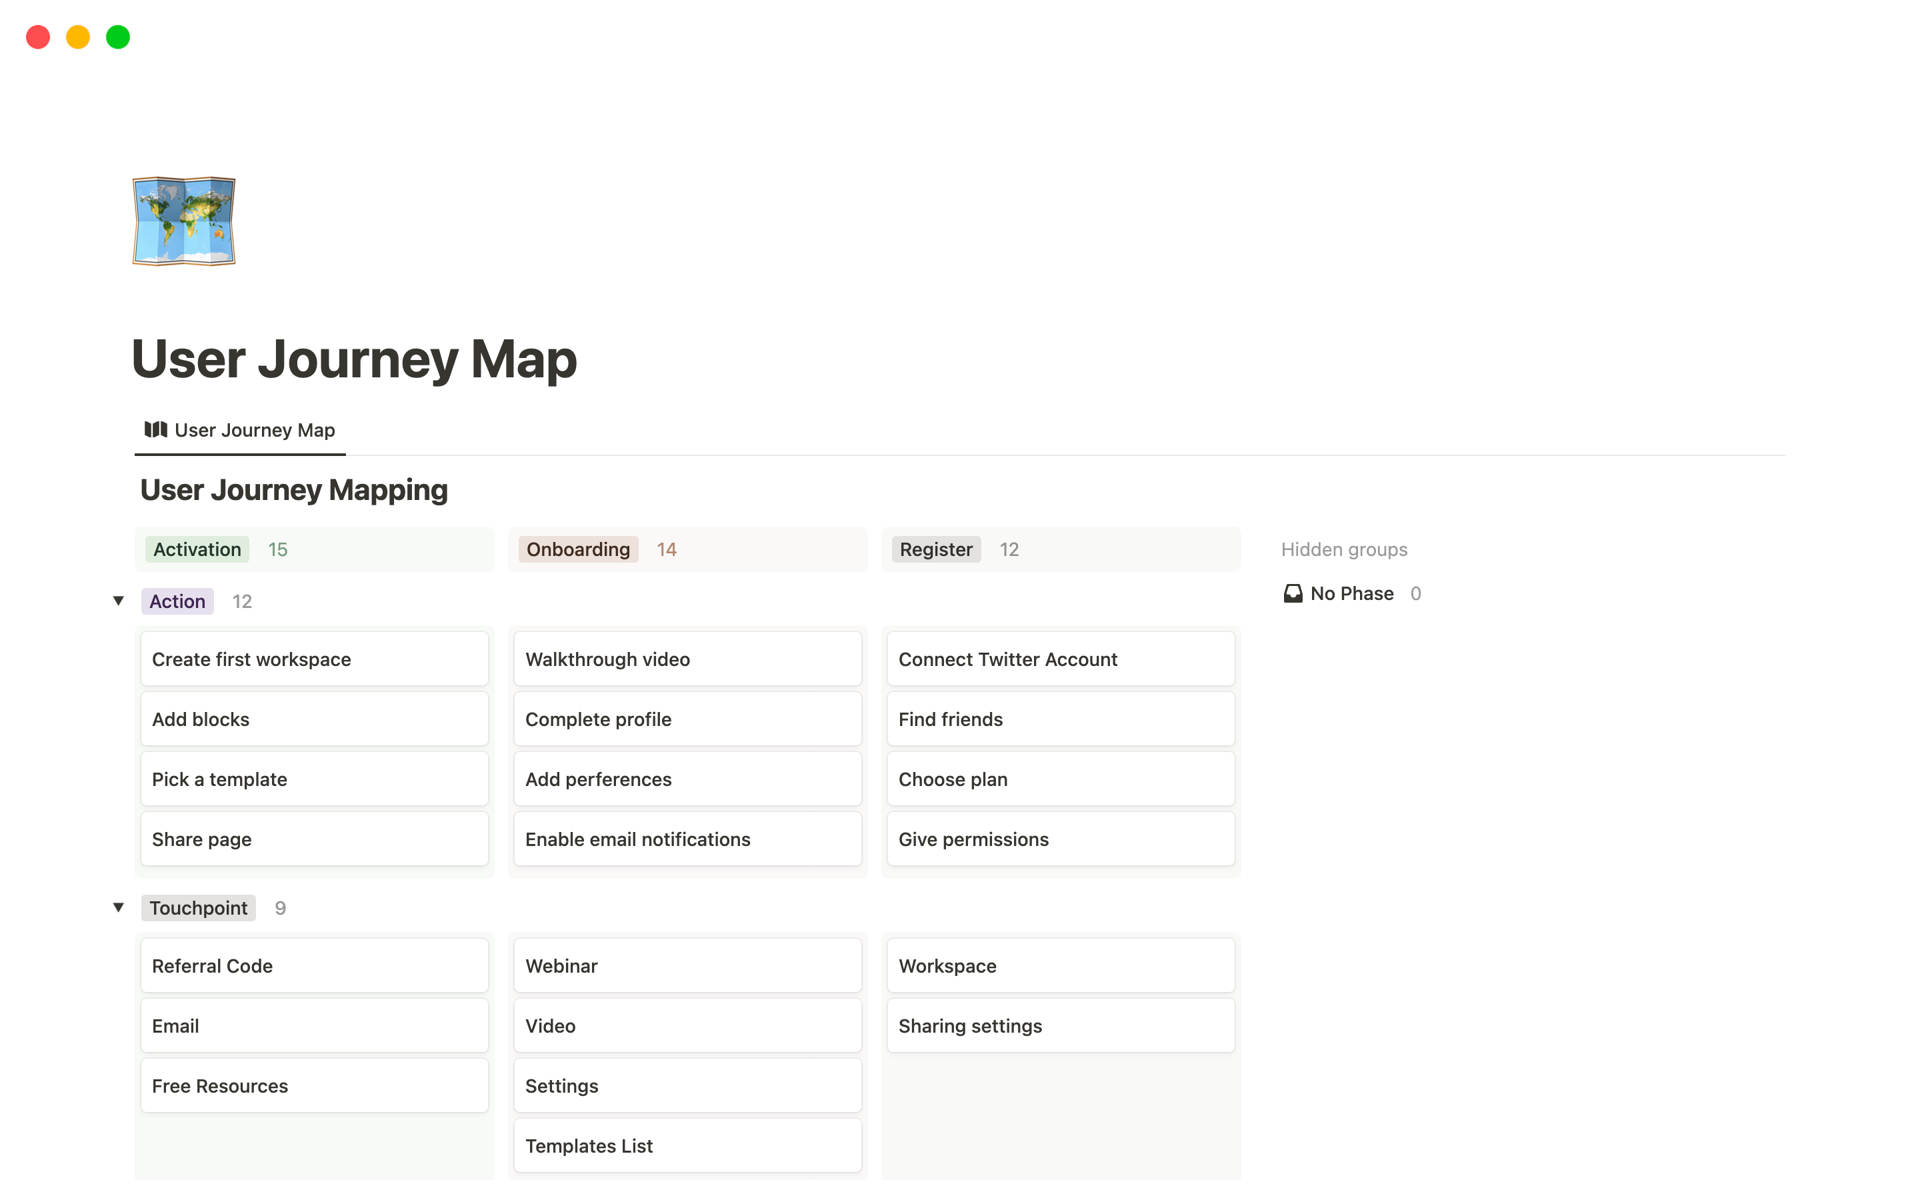 Map out your user journey effectively, track touchpoints and emotions, and visualize opportunities and pain points with our User Journey Map template.